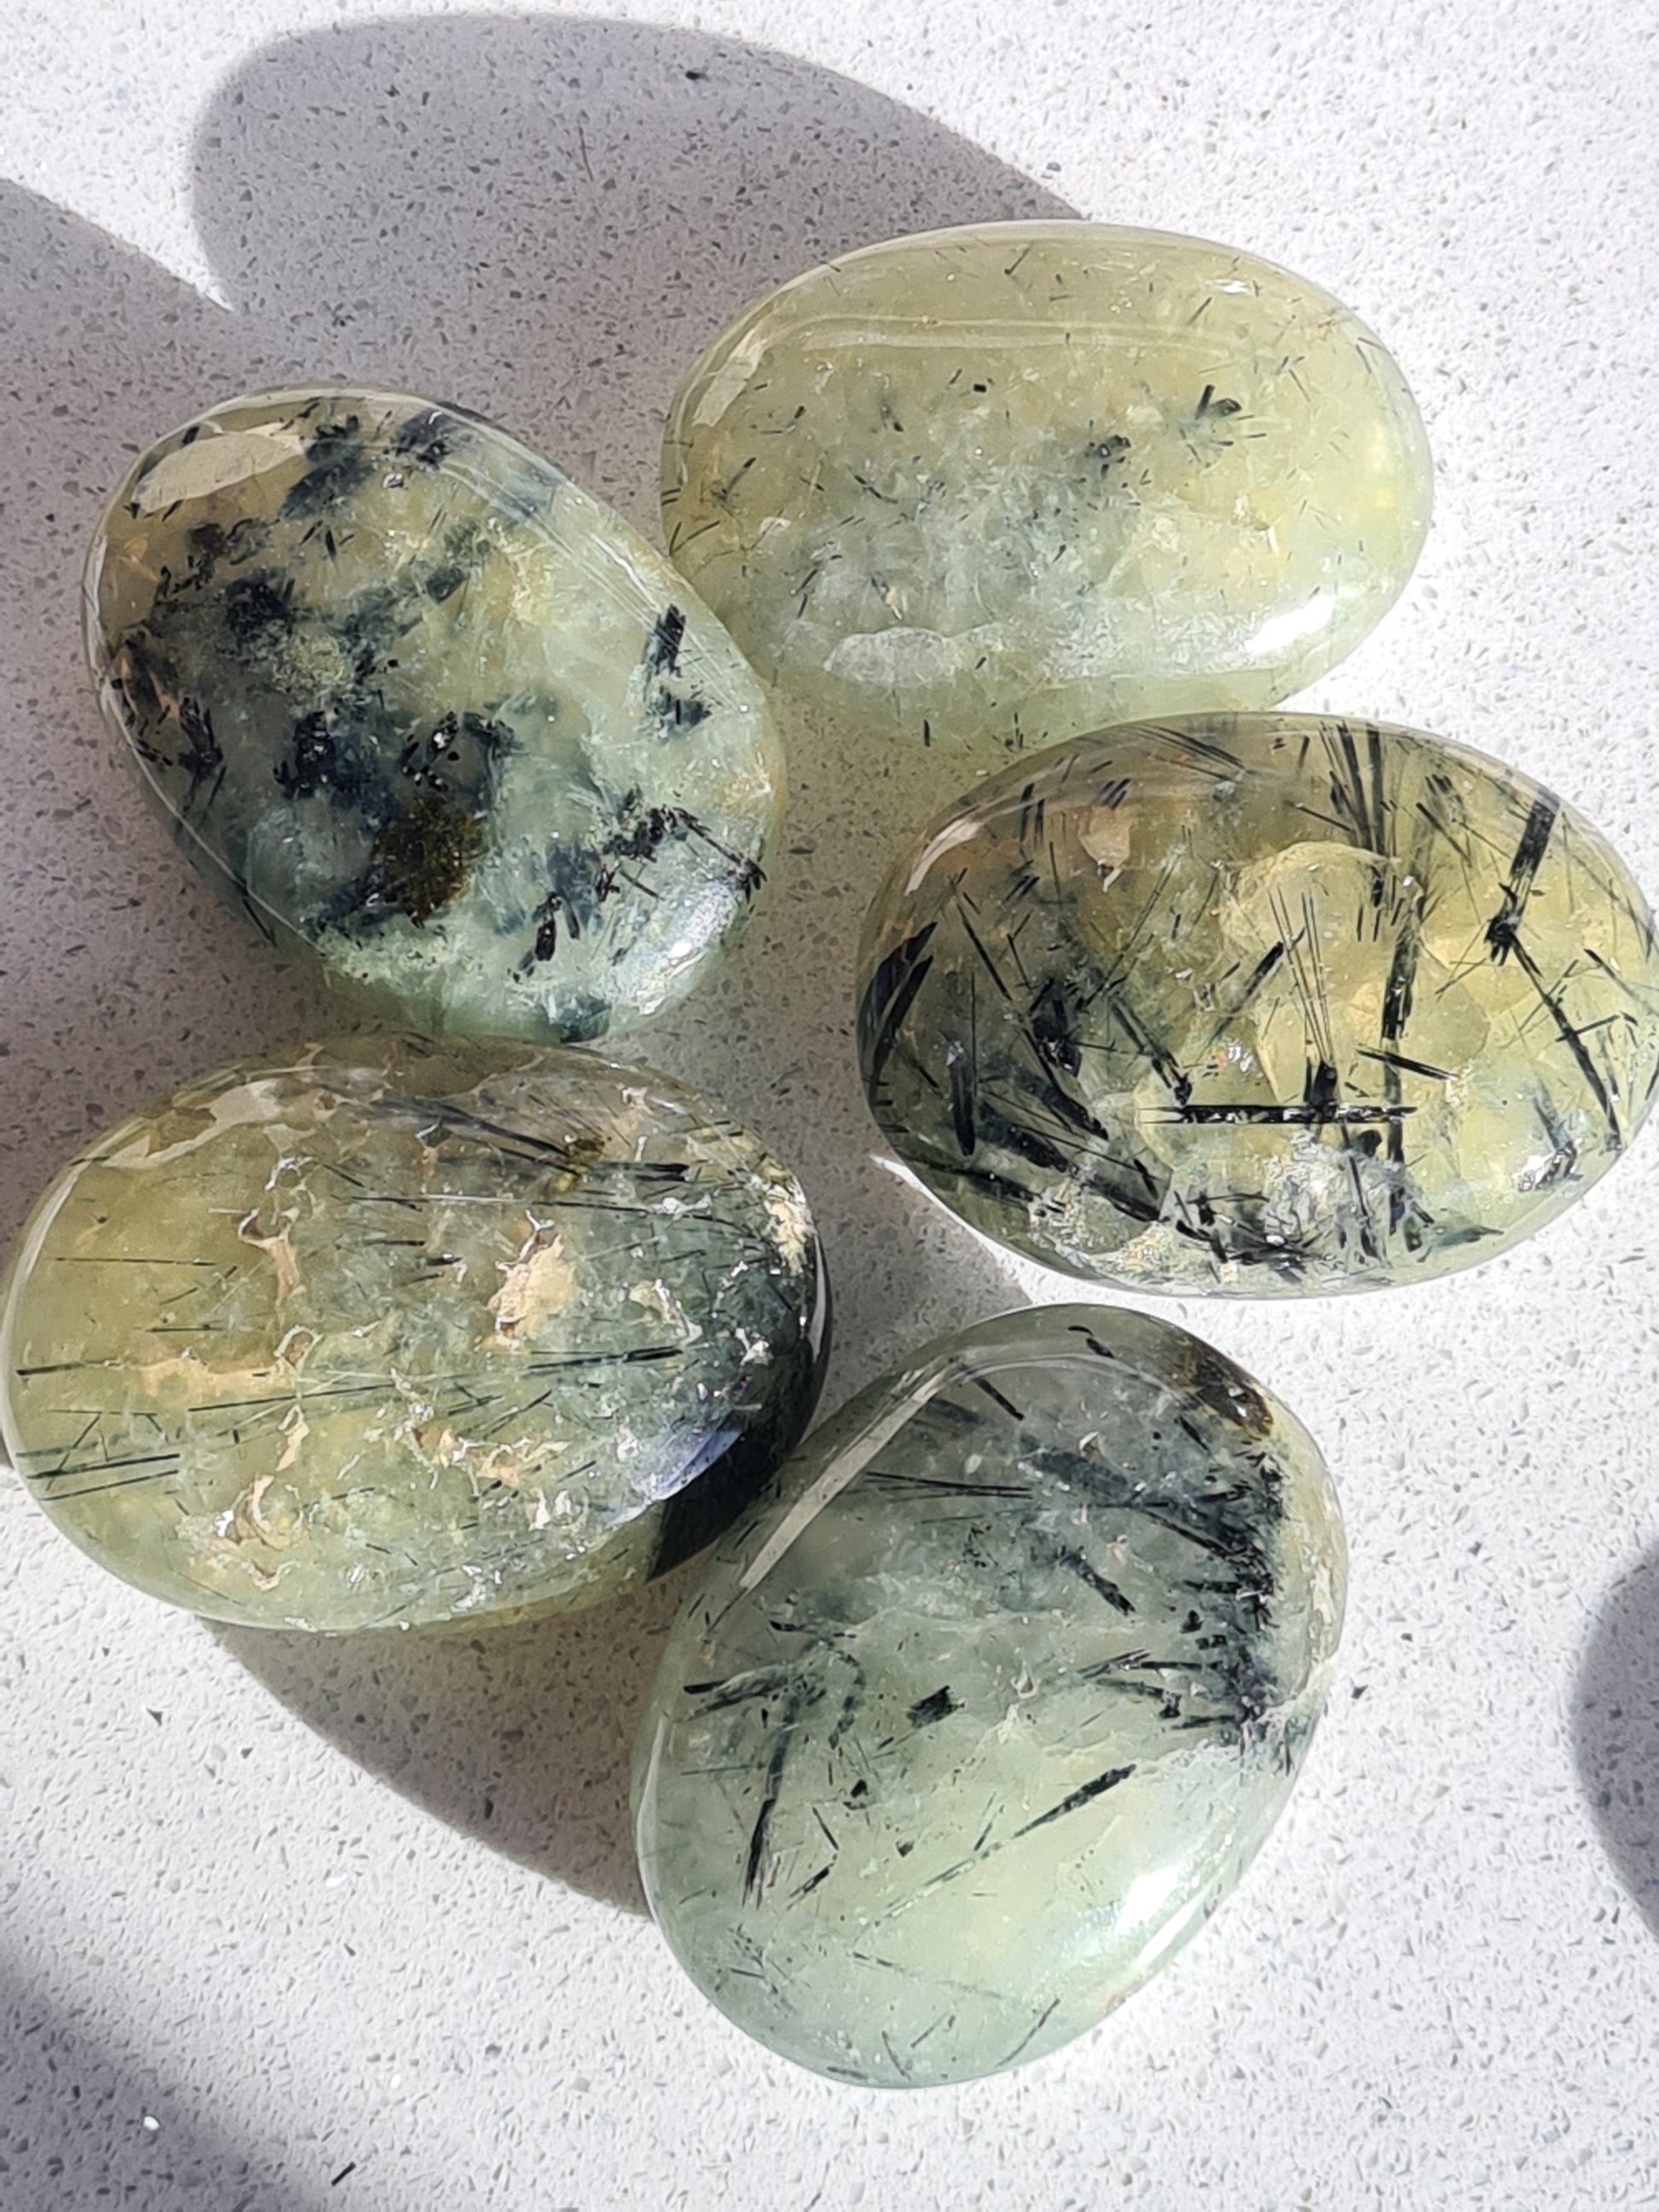 Natural Green Prehnite Oval Palmstones with Dark Green Epidote Inclusions. Each unique with varying amounts of Epidote. 
Five pieces photographed on a white granite background. 